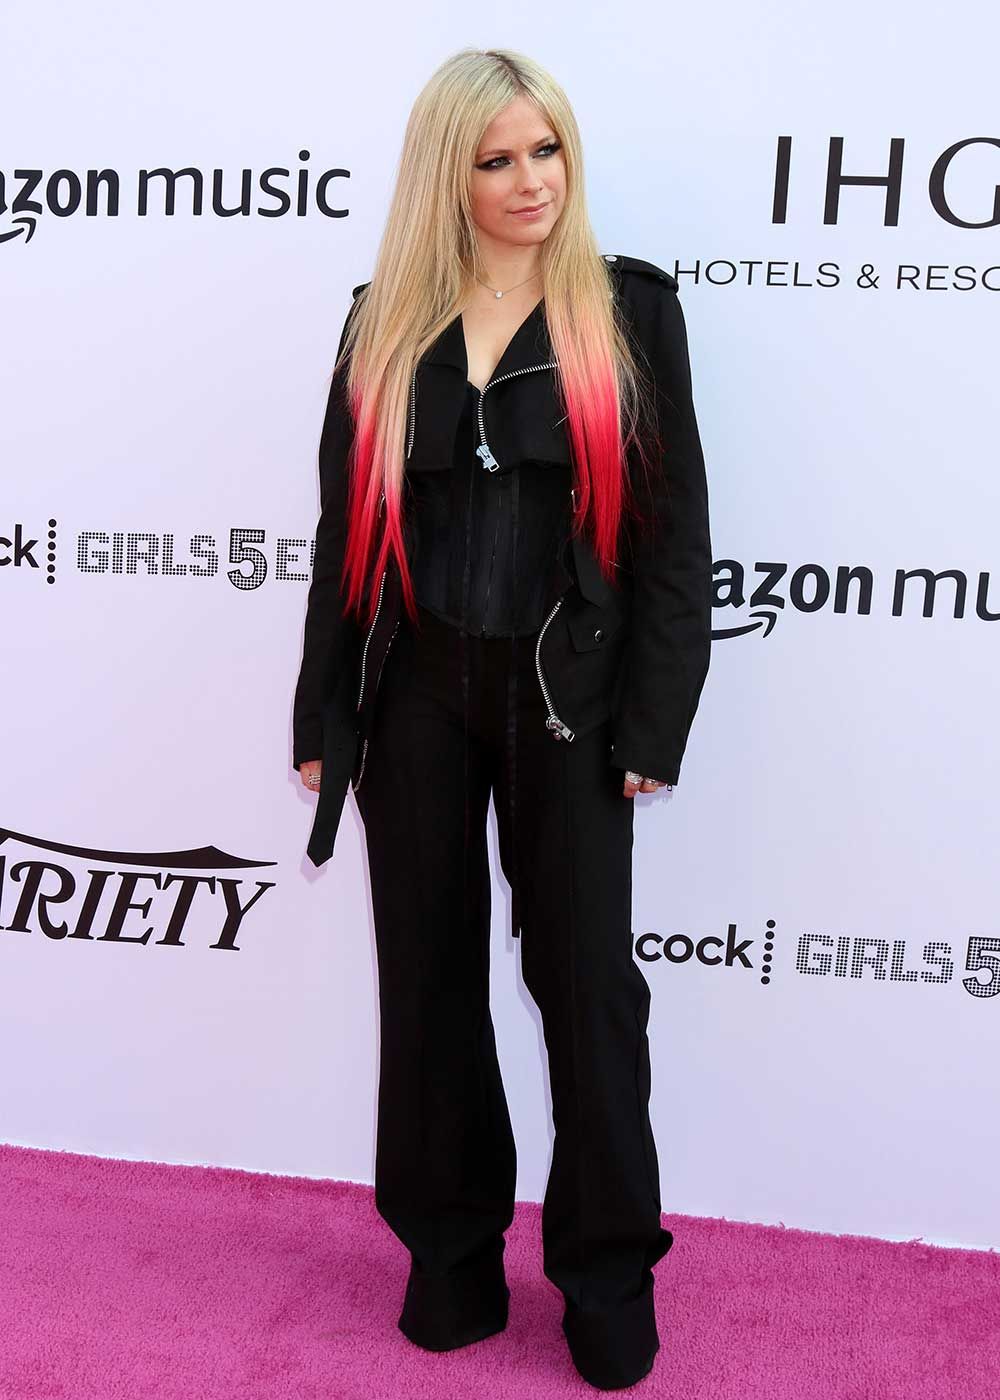  Pop singer Avril Lavigne at an event in Los Angeles, California, on Dec. 4, 2021.